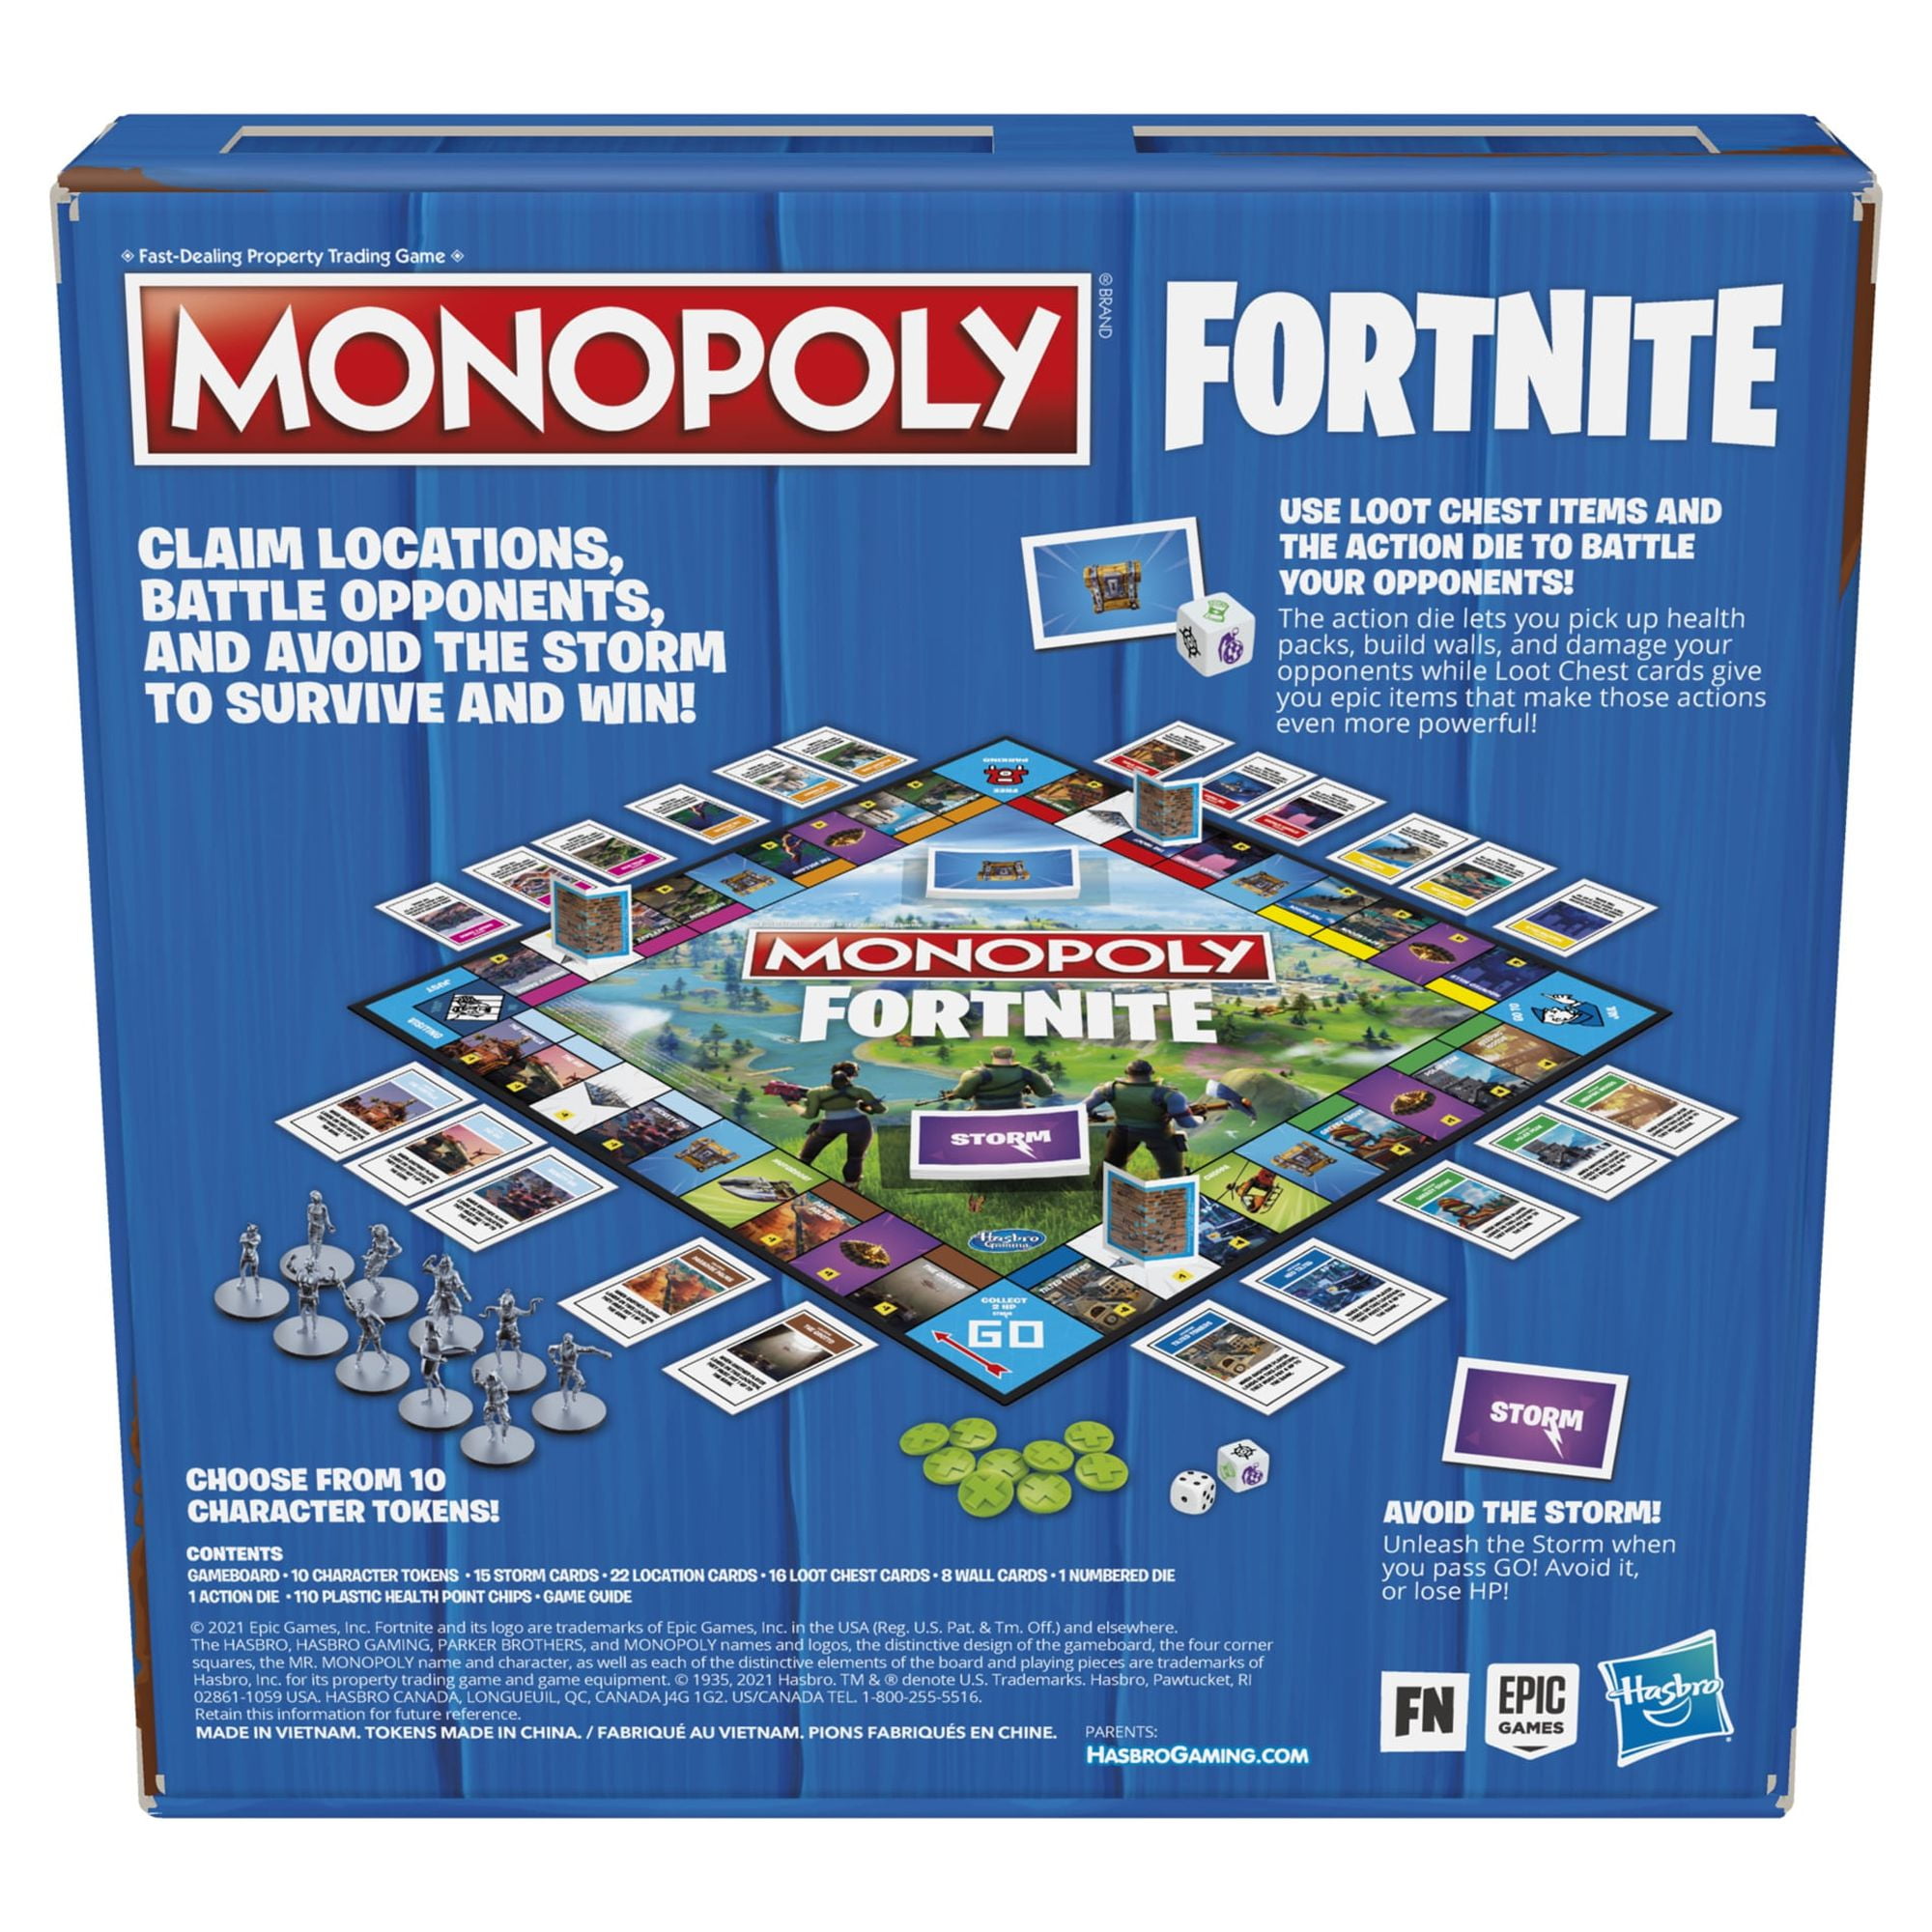 Fortnite Account Monopoly Collectors Board Game New Sealed